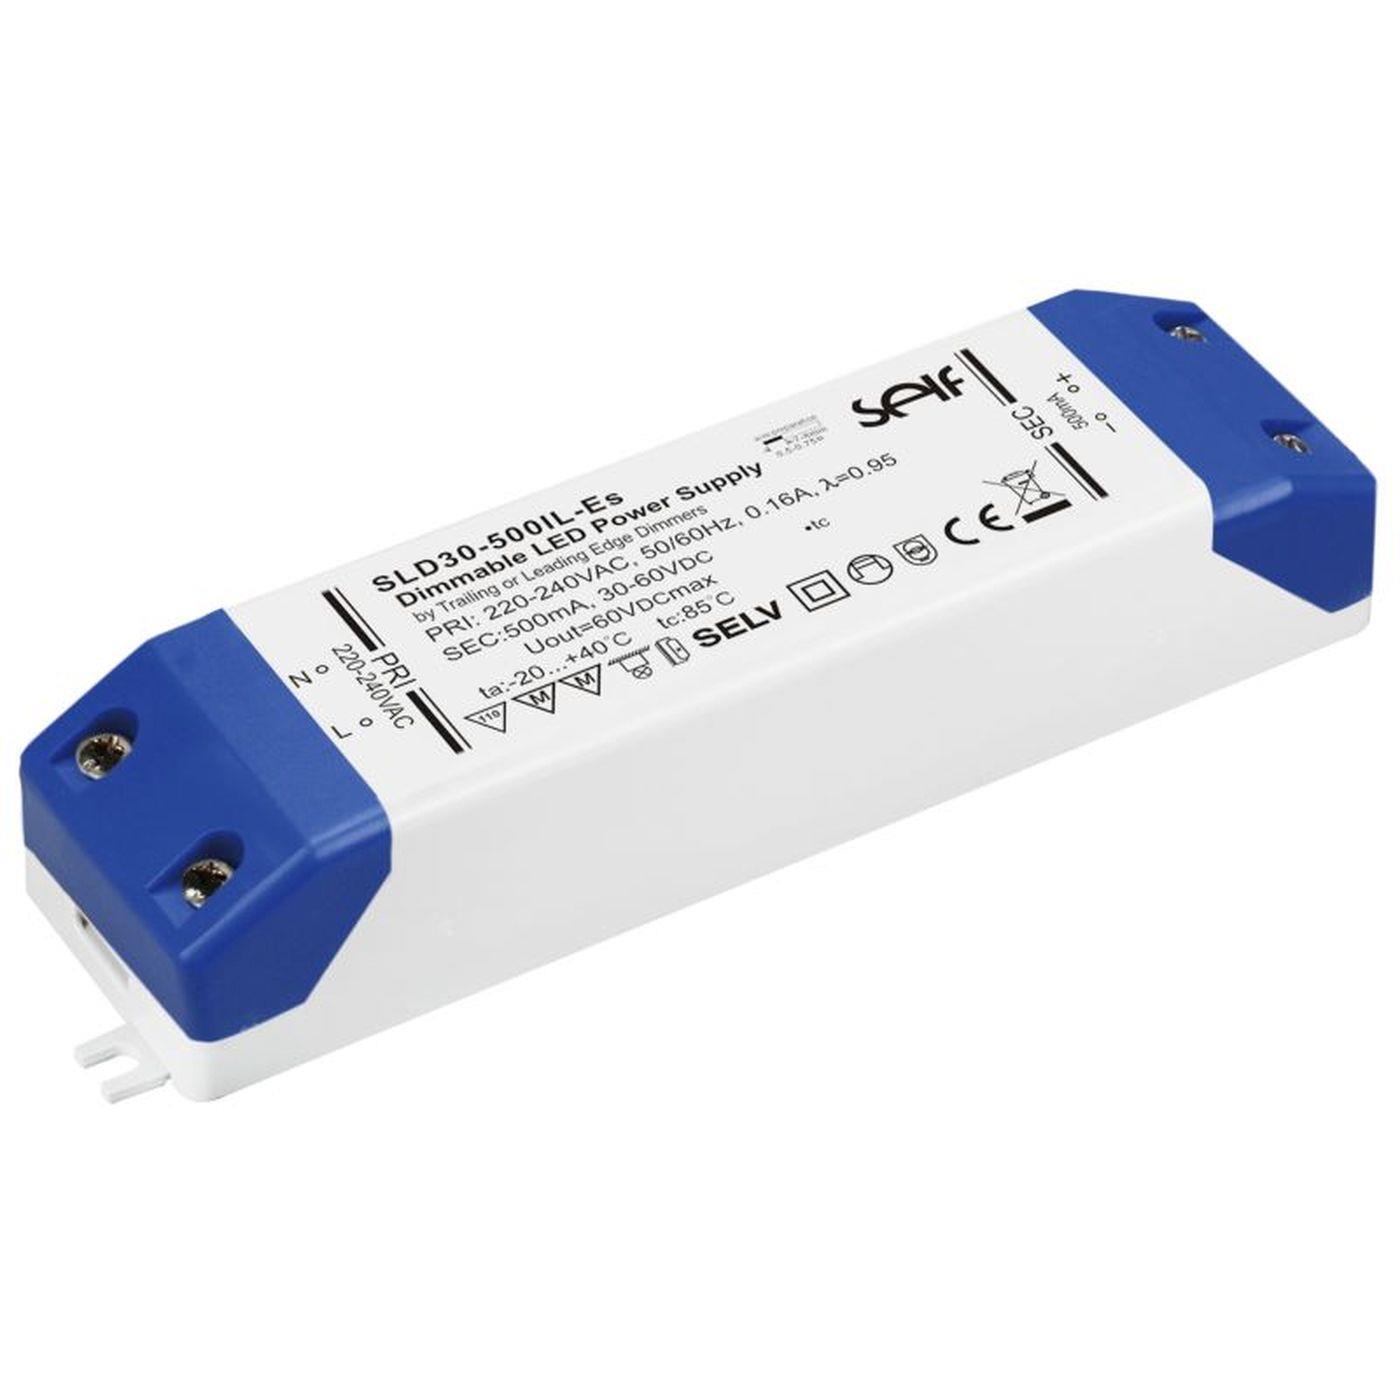 SLD30-700IL-ES 30W 700mA 21...42VDC Constant current LED power supply Driver Transformer Triac Dimmable